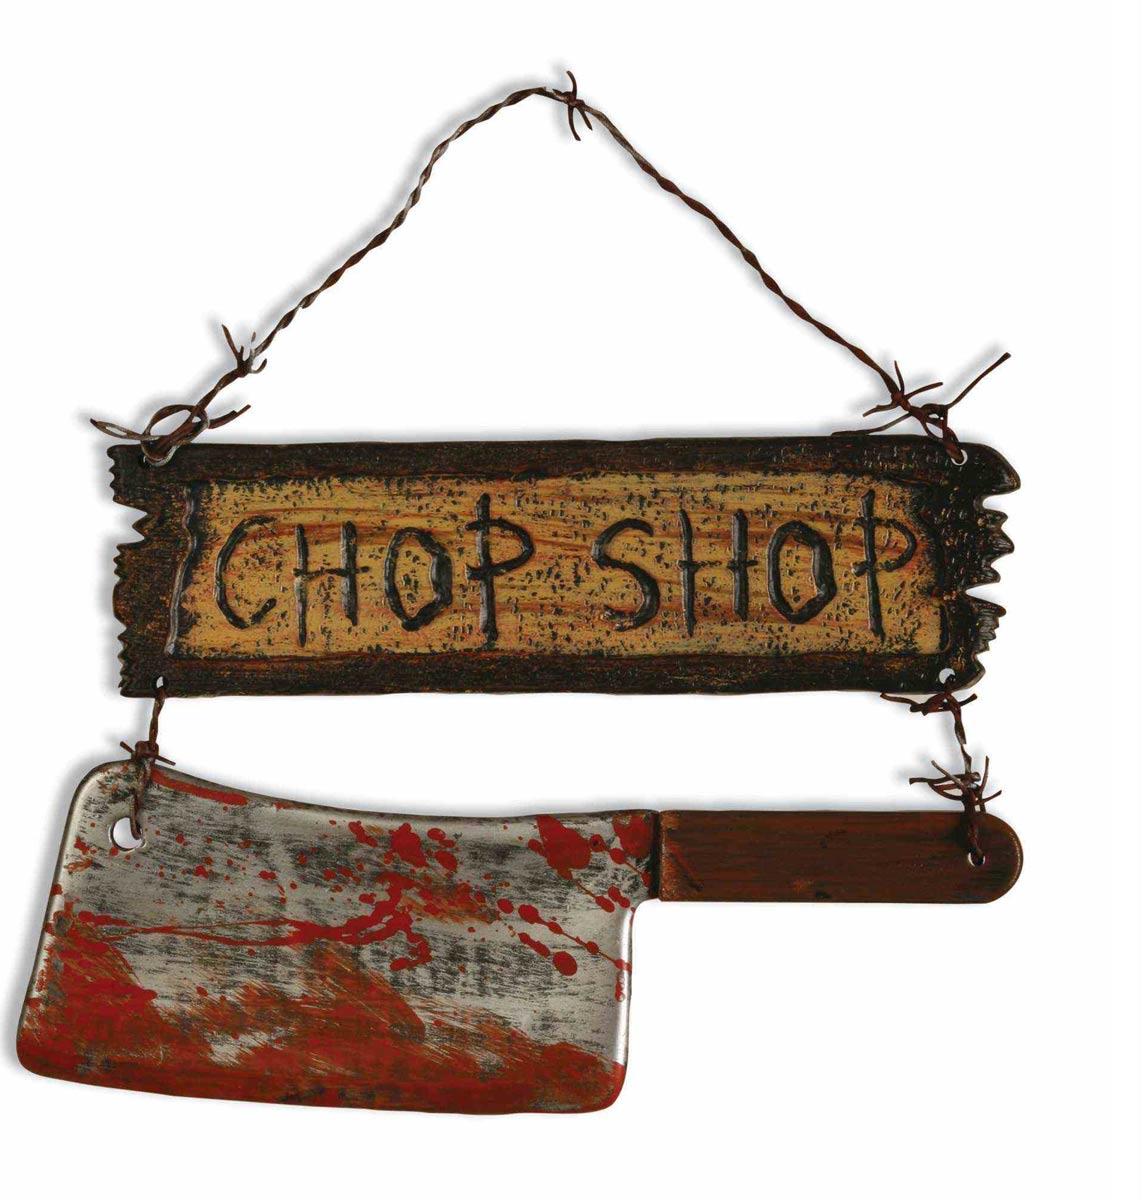 Halloween Chop Shop Sign with Cleaver by Forum Novelties 63049 available here at Karnival Costumes online Halloween party shop